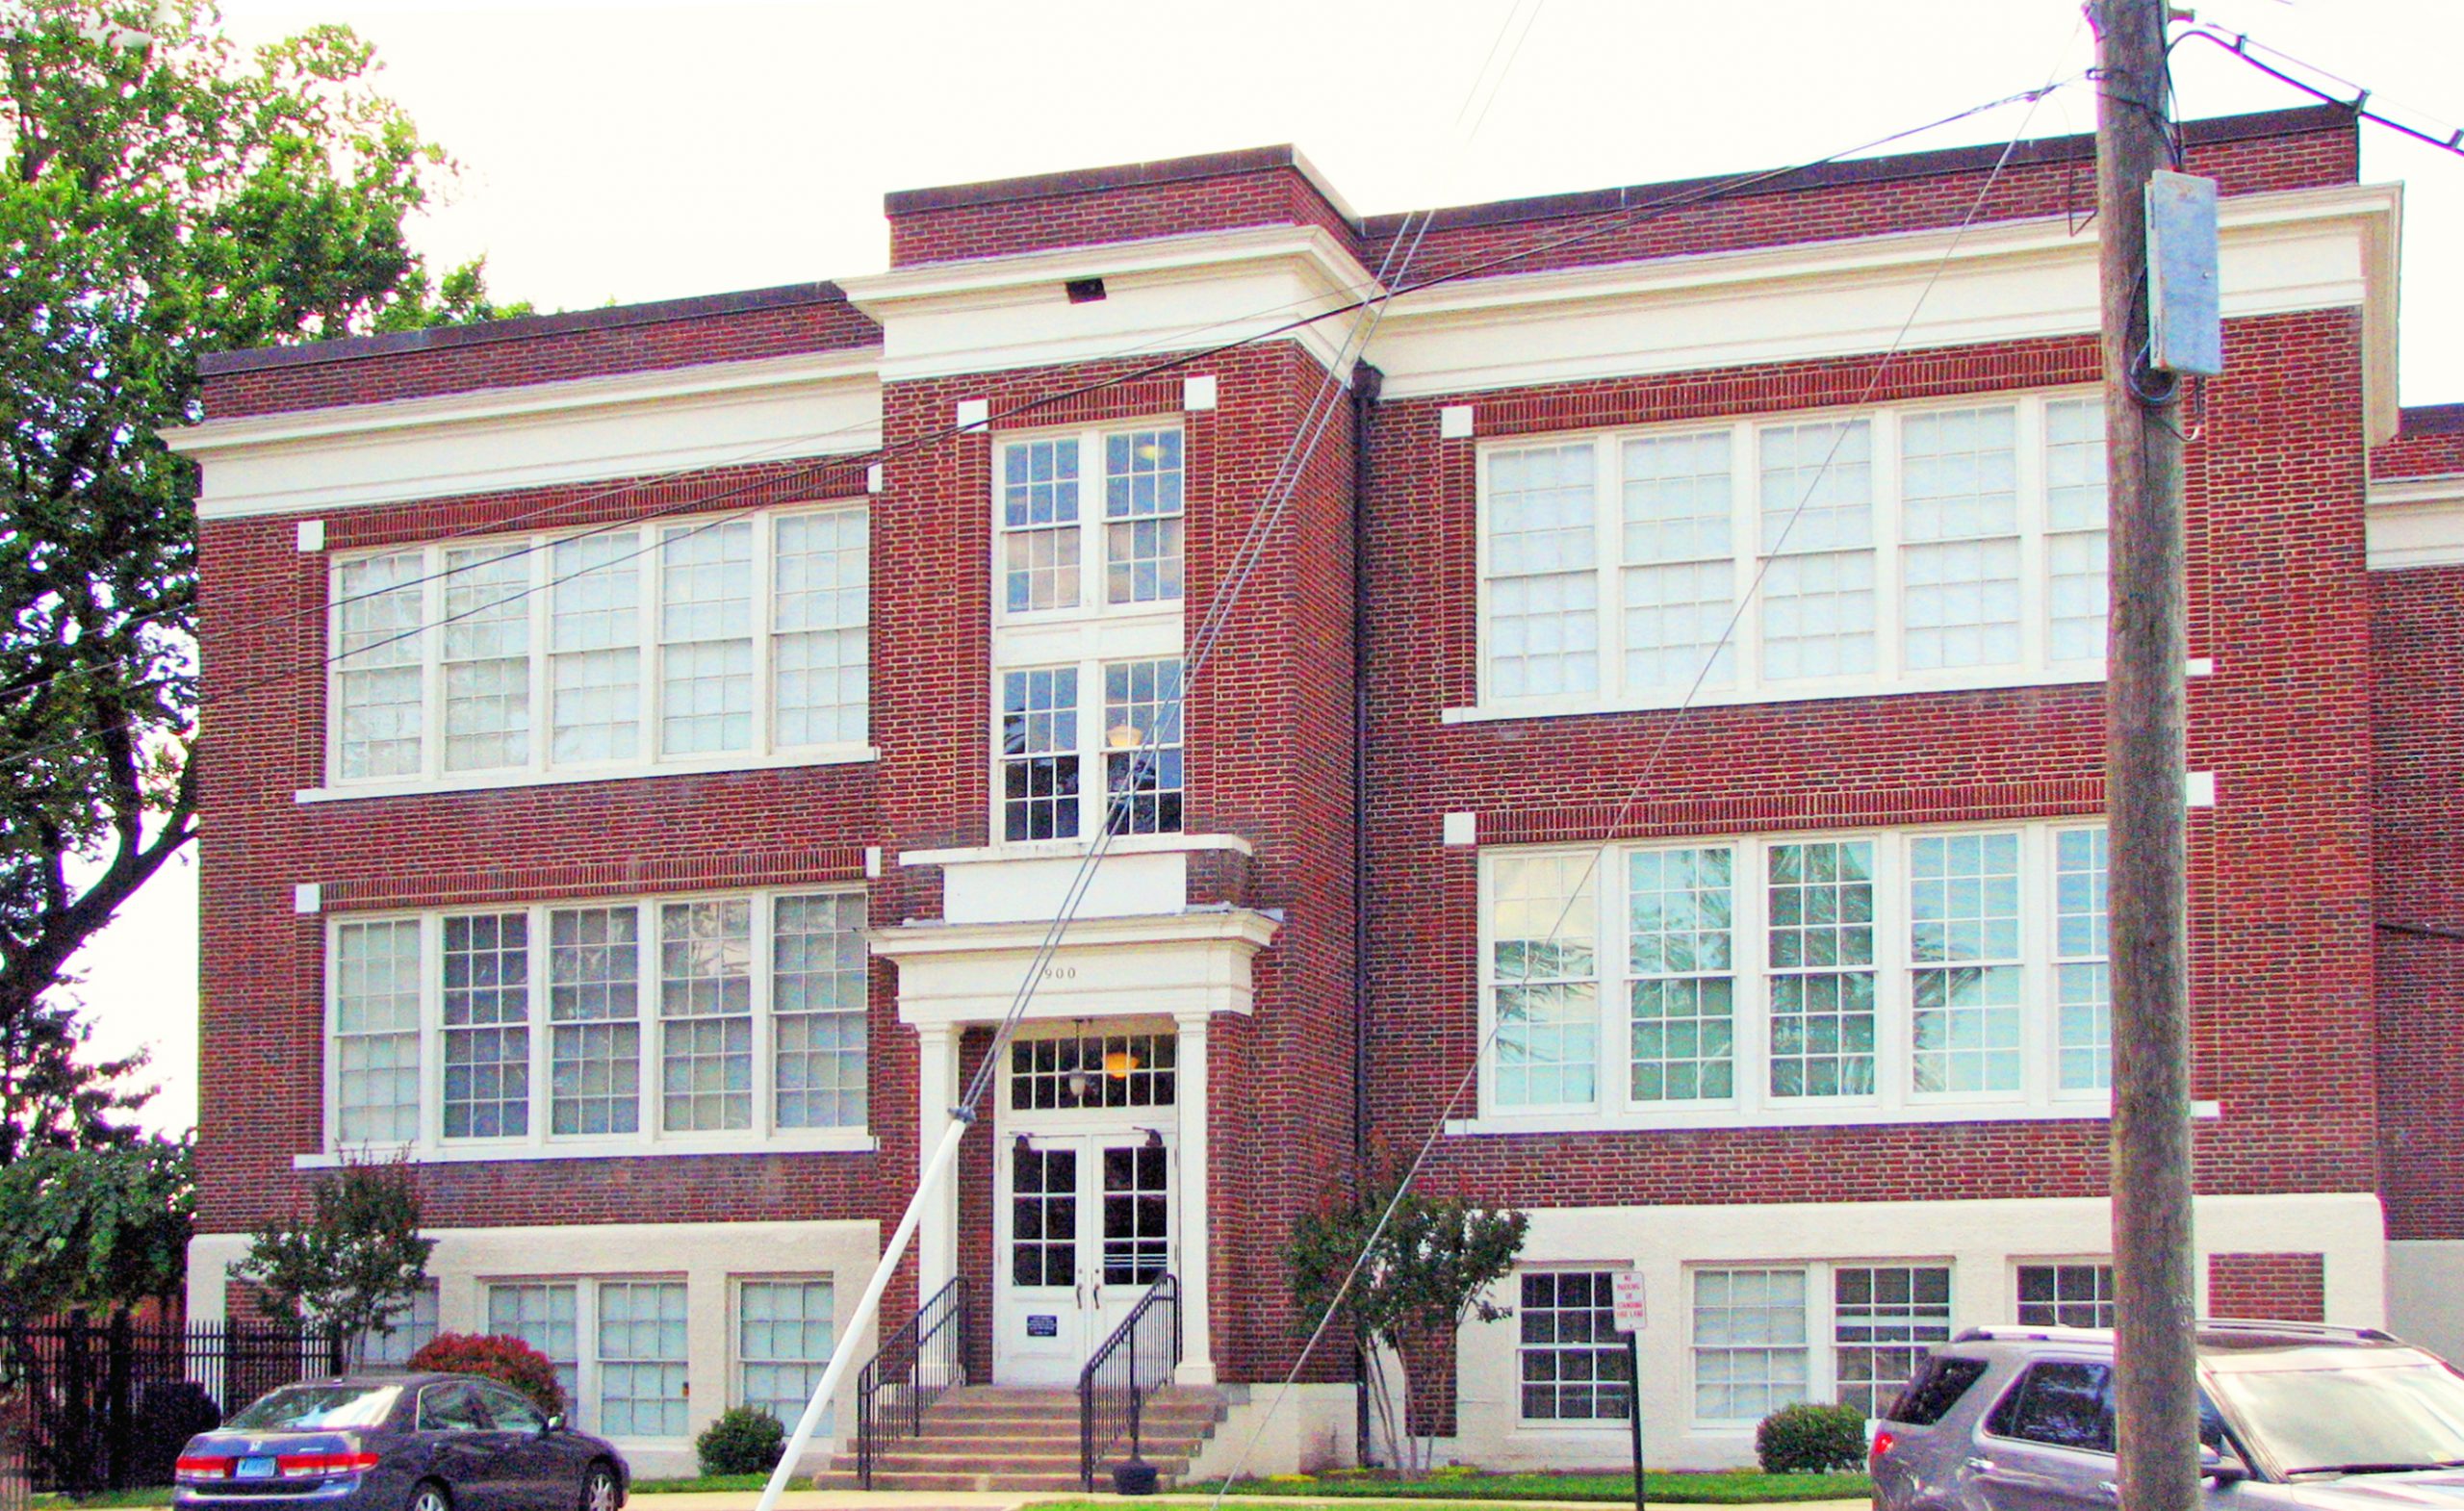 111-0009-0014_Matthew_Fontaine_Maury_School_2012_exterior_front_elevation_VLR_Online-scaled